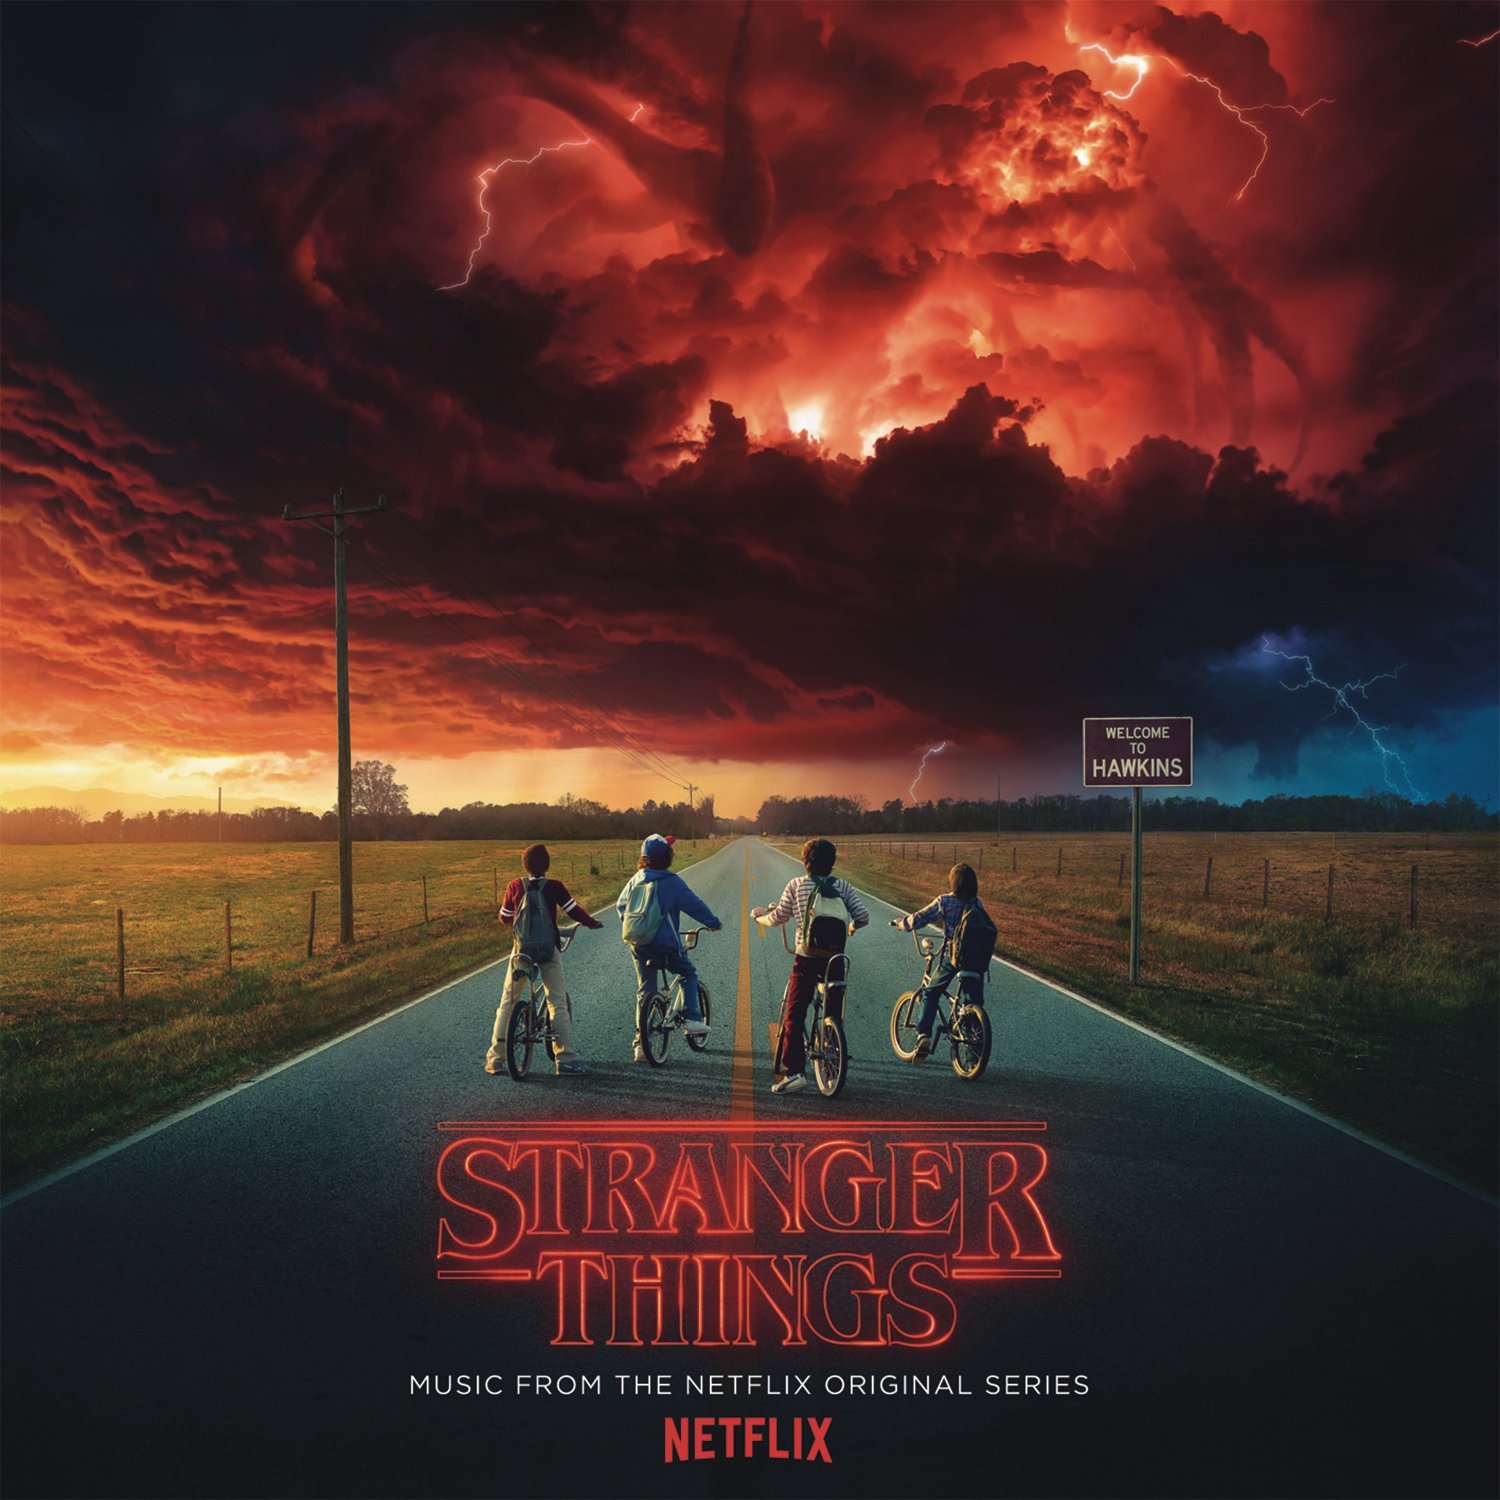 Couverture de : Stranger things : music from the Netflix original series